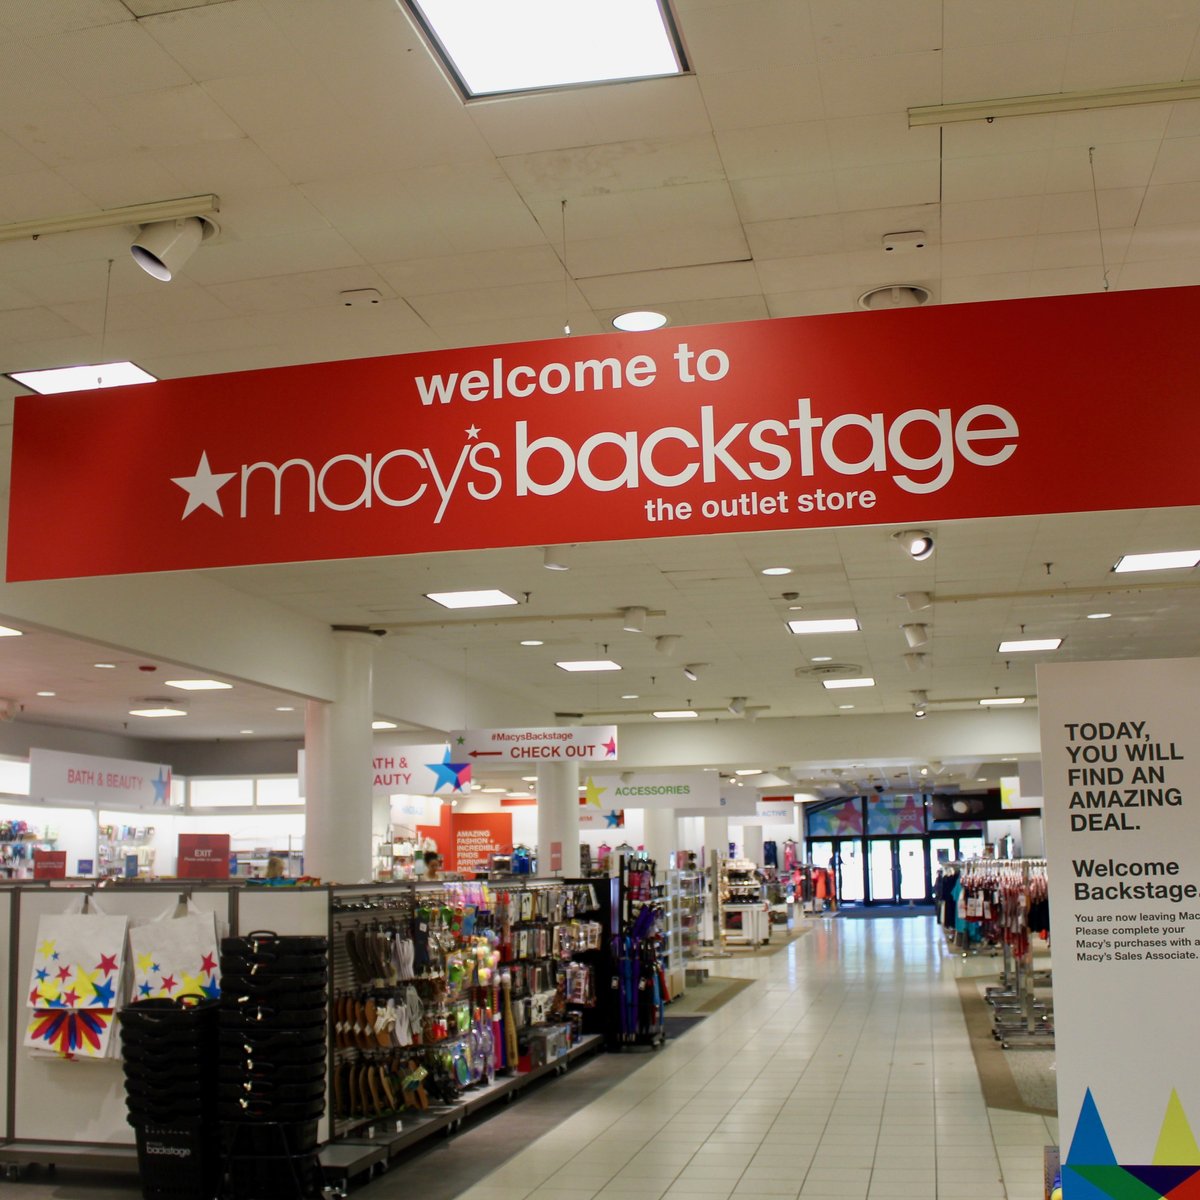 Photos: Macy's opens off-price 'Backstage' shop inside Mayfair store